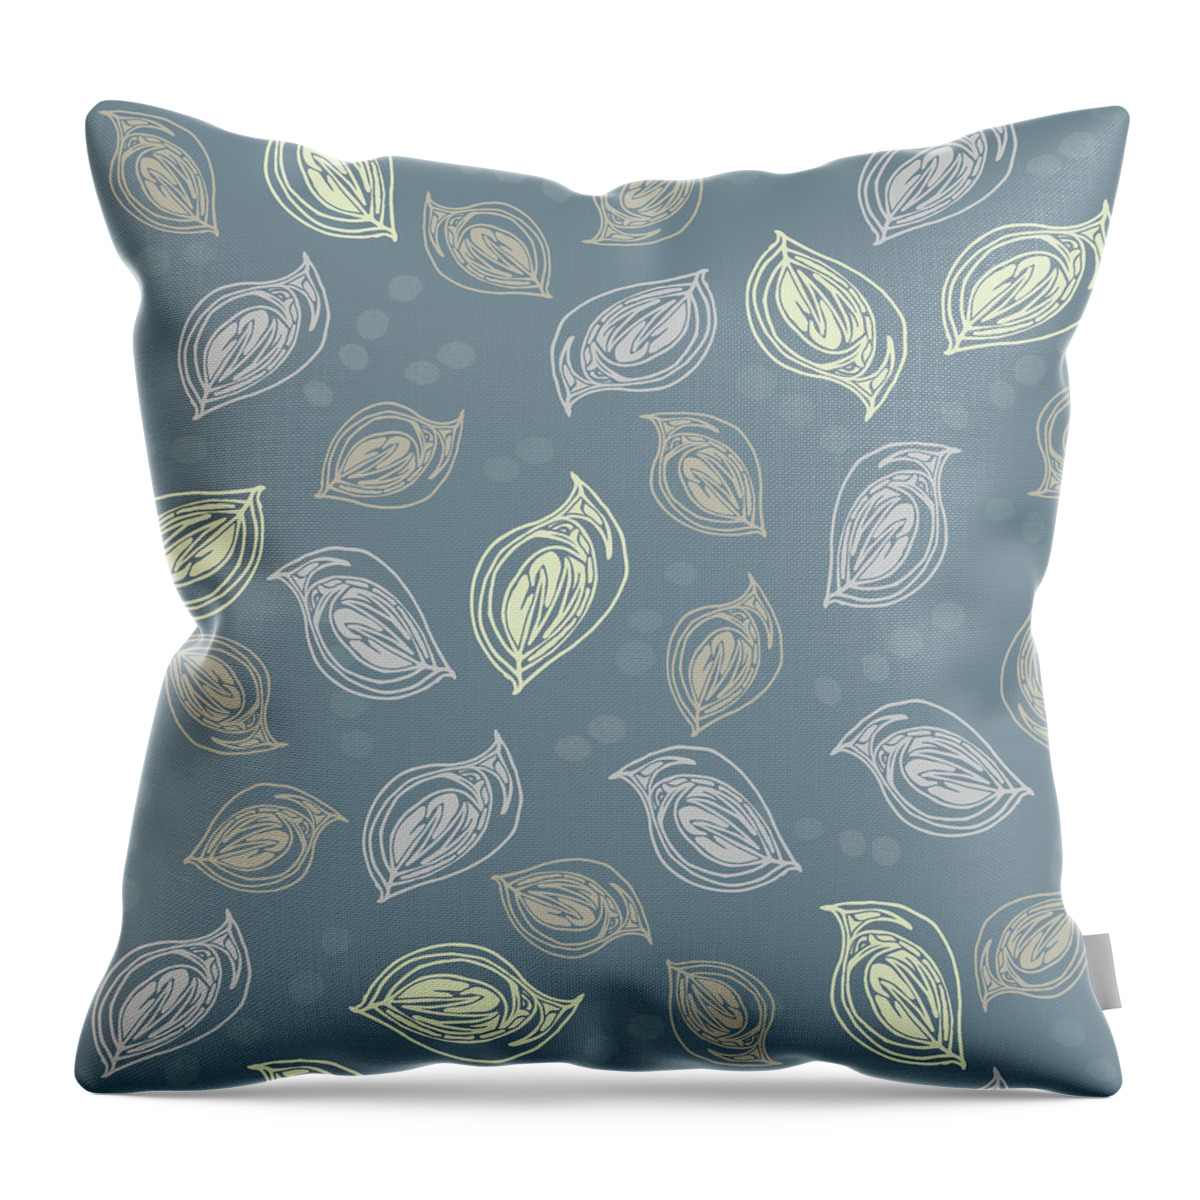 Tribal Throw Pillow featuring the digital art Tribal Paisley Print by Sand And Chi